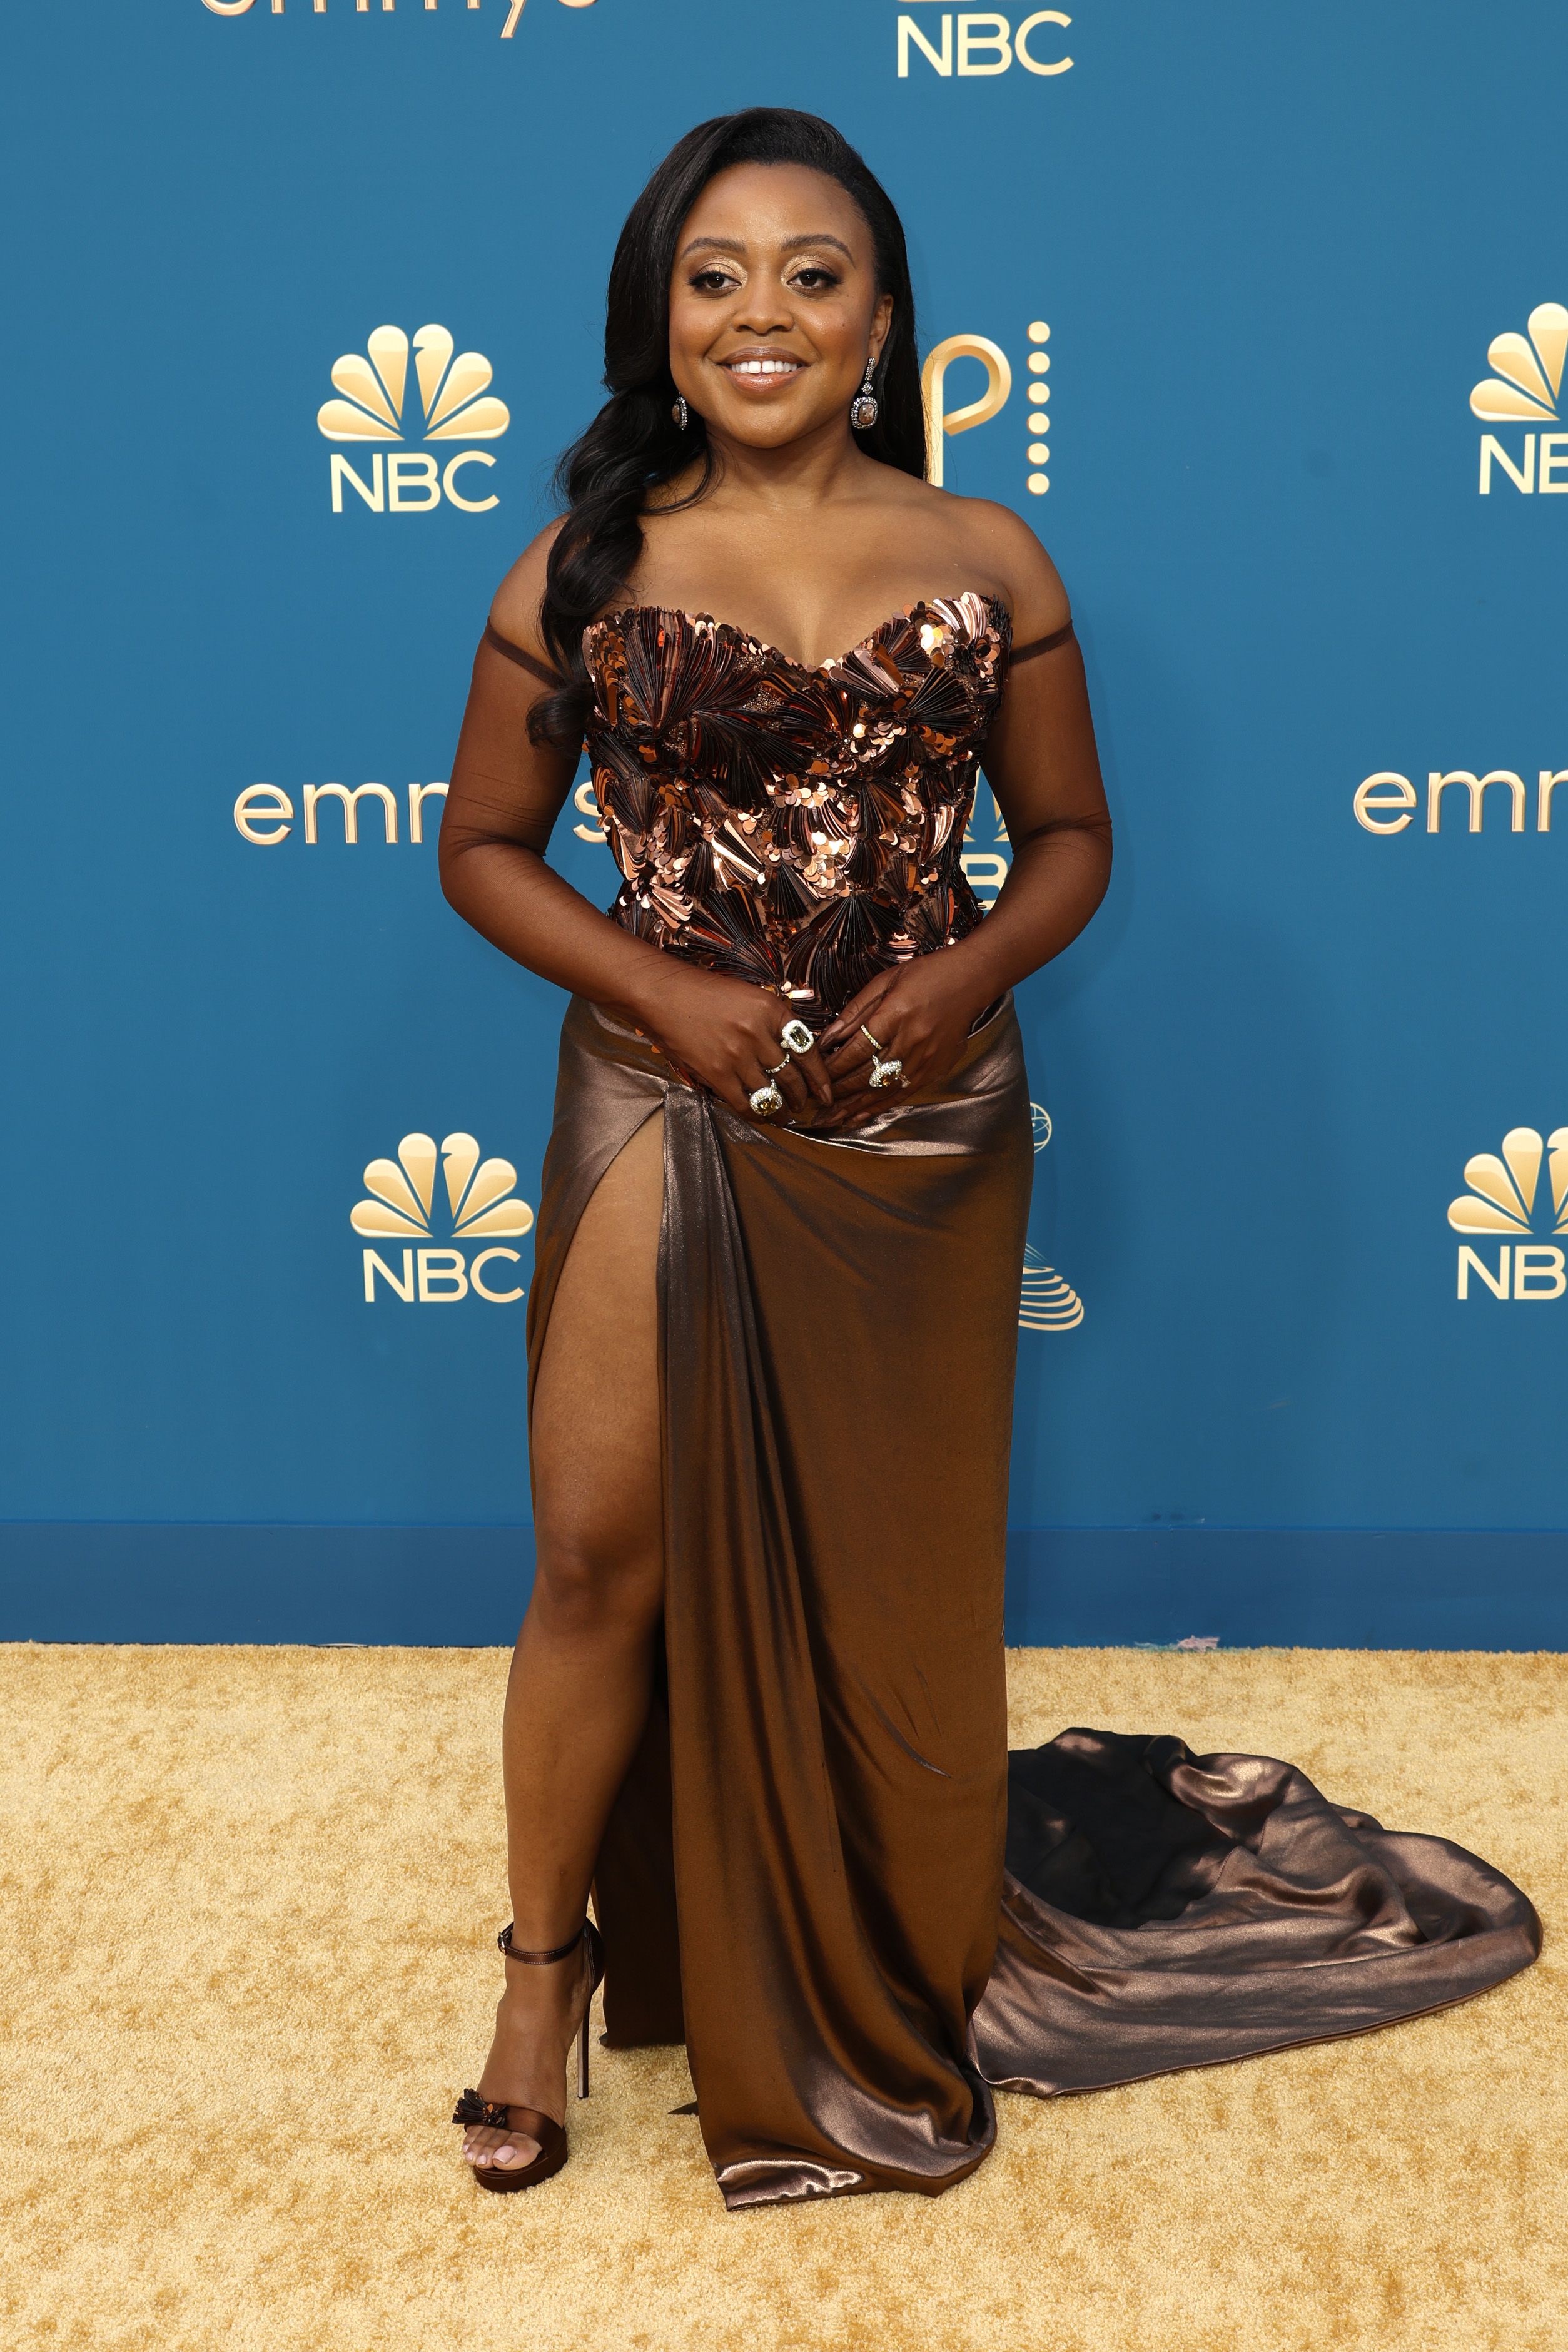 Best Dressed Celebrities at the Emmy Awards 2022